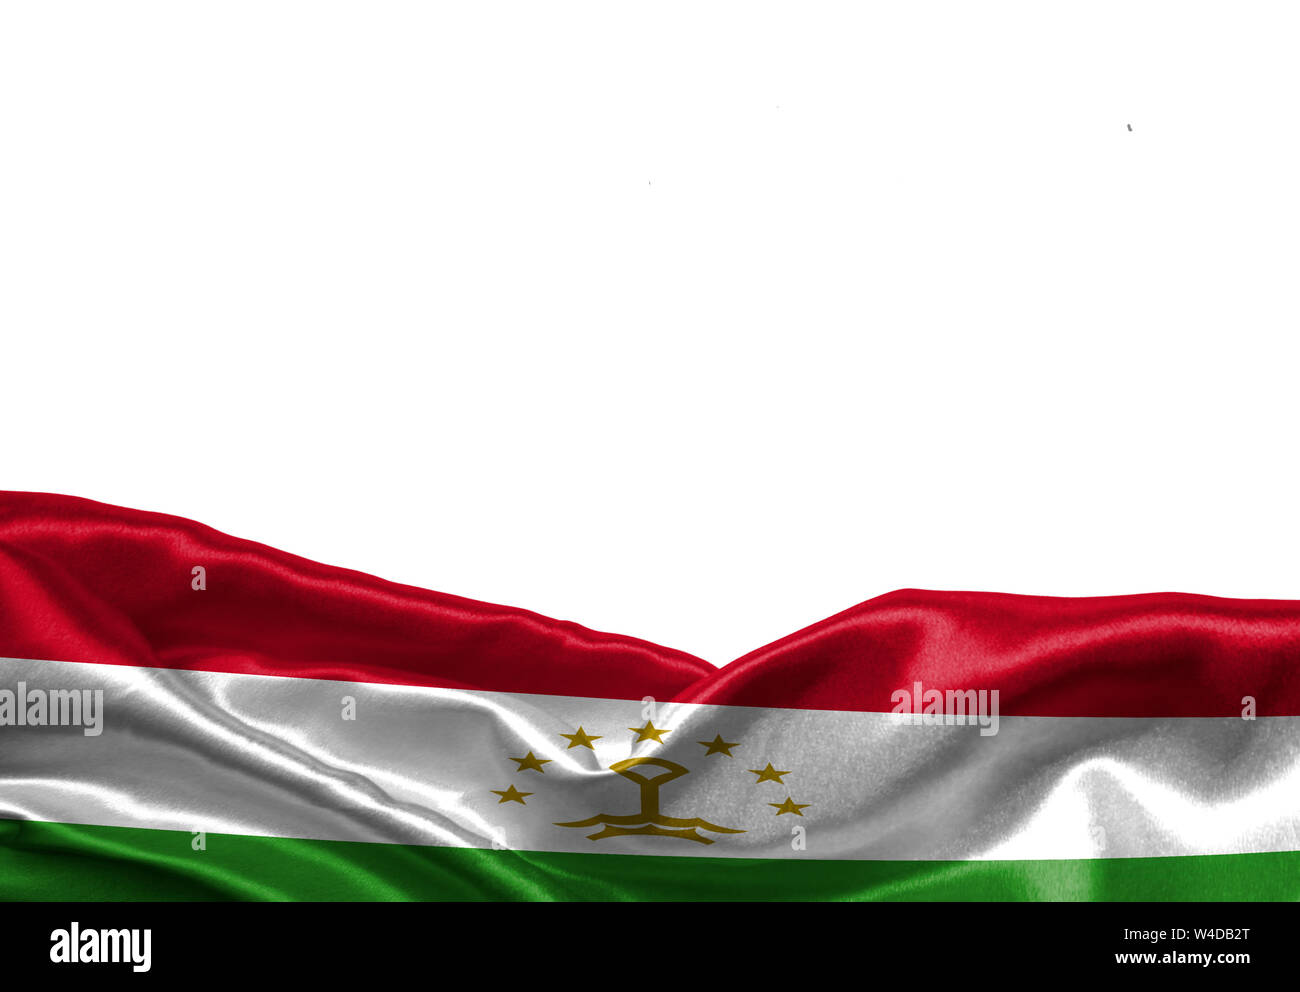 Tajikistan flag isolated on white background with place for your text. Stock Photo